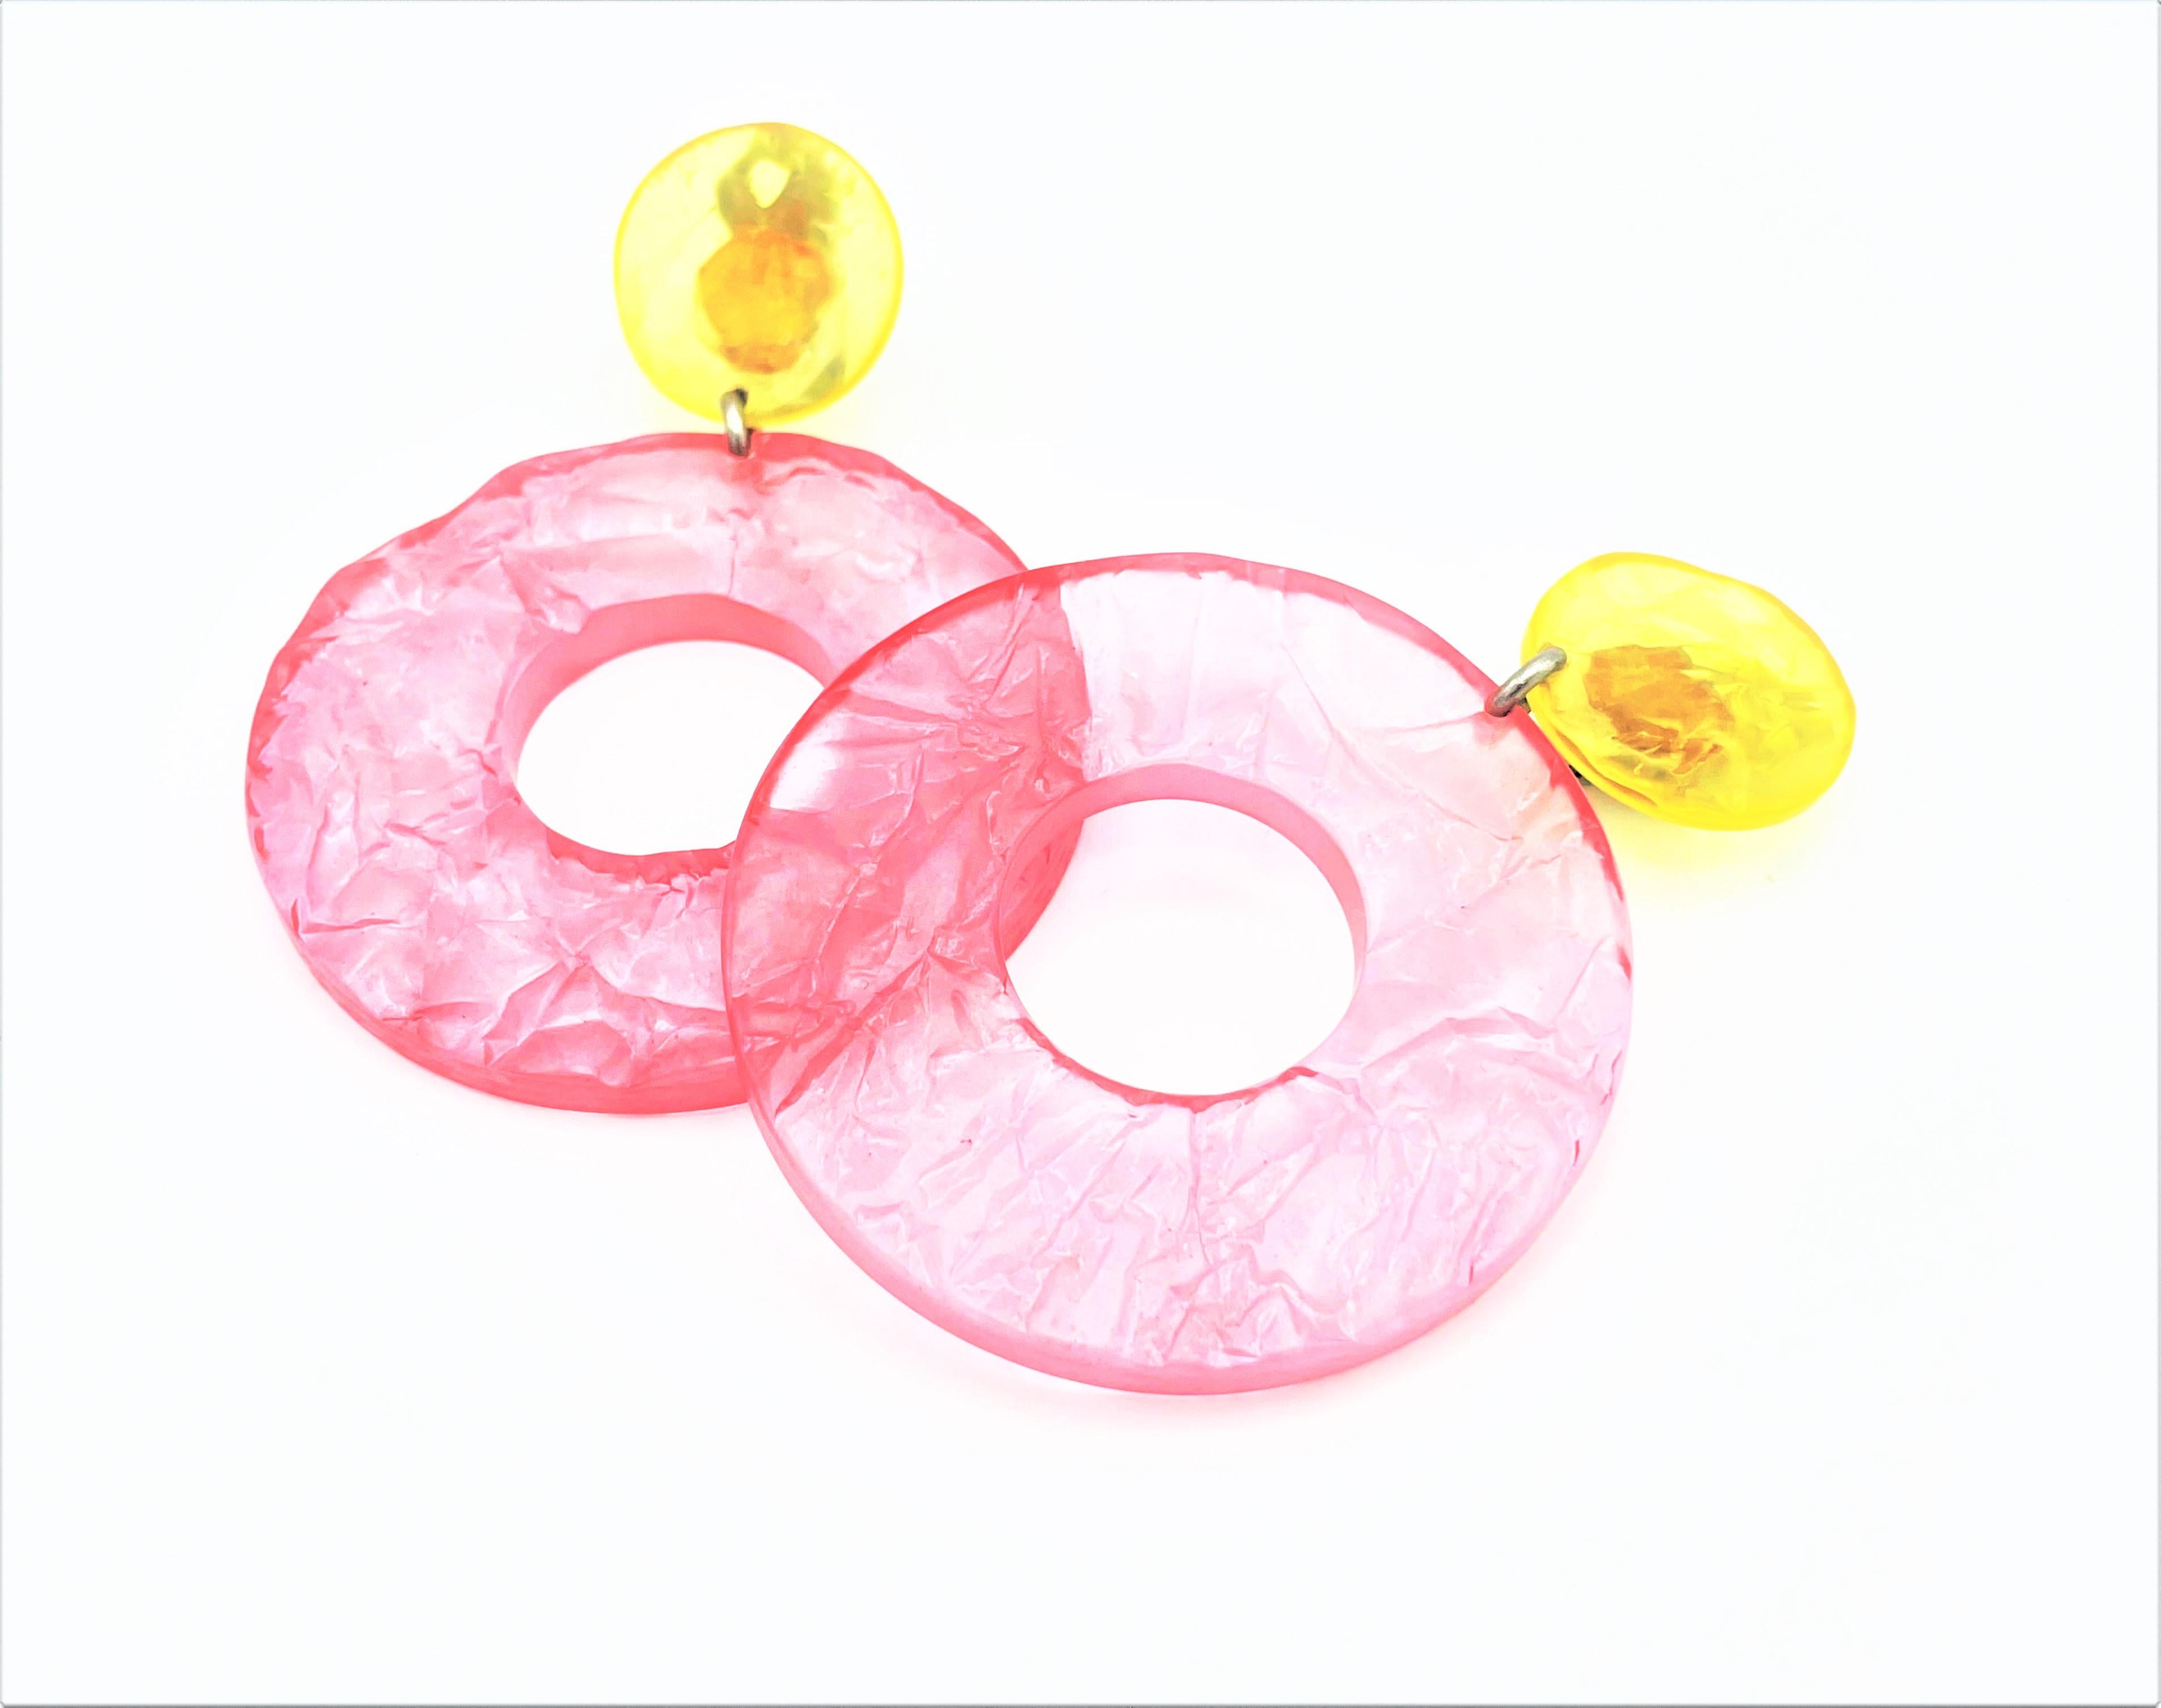 Huge decorative summery clip-on earring coming from Italy around  2000. Consisting of a yellow part and a pink colored circle.   
Measurement: Full length 9 cm, W 6,4 cm, D 0,5 cm. The yellow part 2,5 diameter,  the pink circle 6,4 in diameter and 2